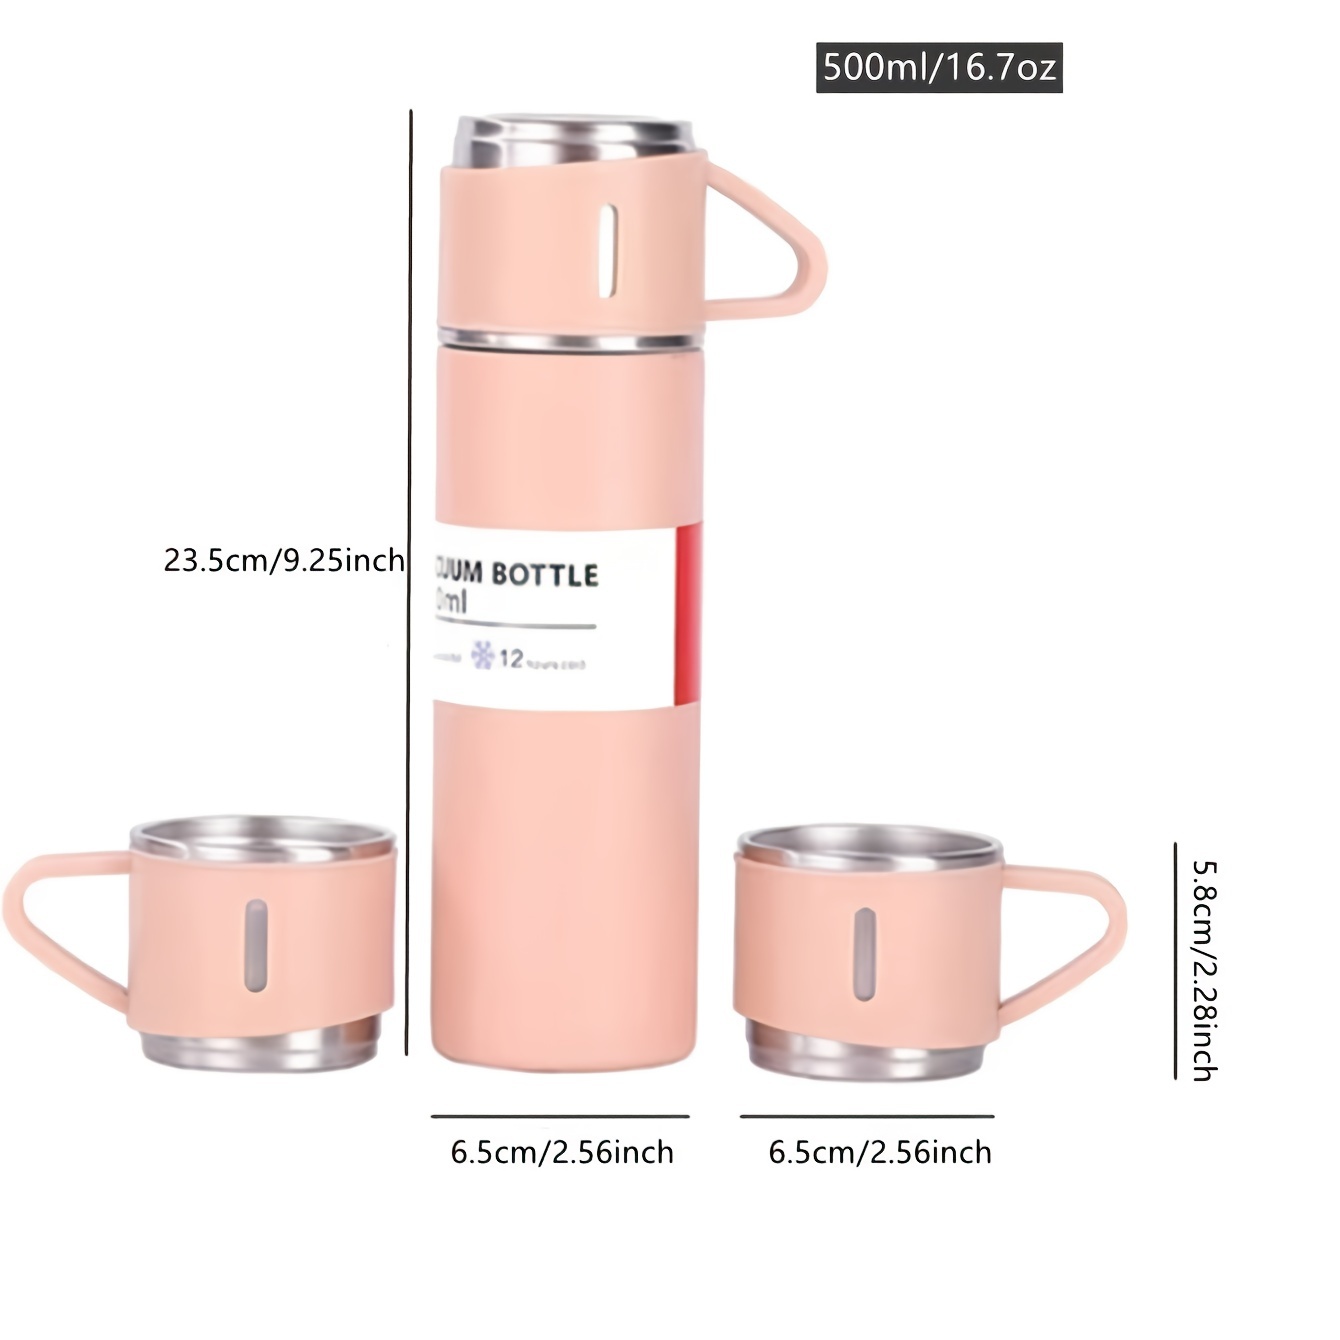 3pcs/1Set Stainless Steel Thermal Cup, With Gift Box Set, Double Layer  Leakproof Insulated Water Bottle, Keeps Hot And Cold Drinks For Hours,  Suitable For Cycling, Backpacking, Office Or Car, School, Party, Camping